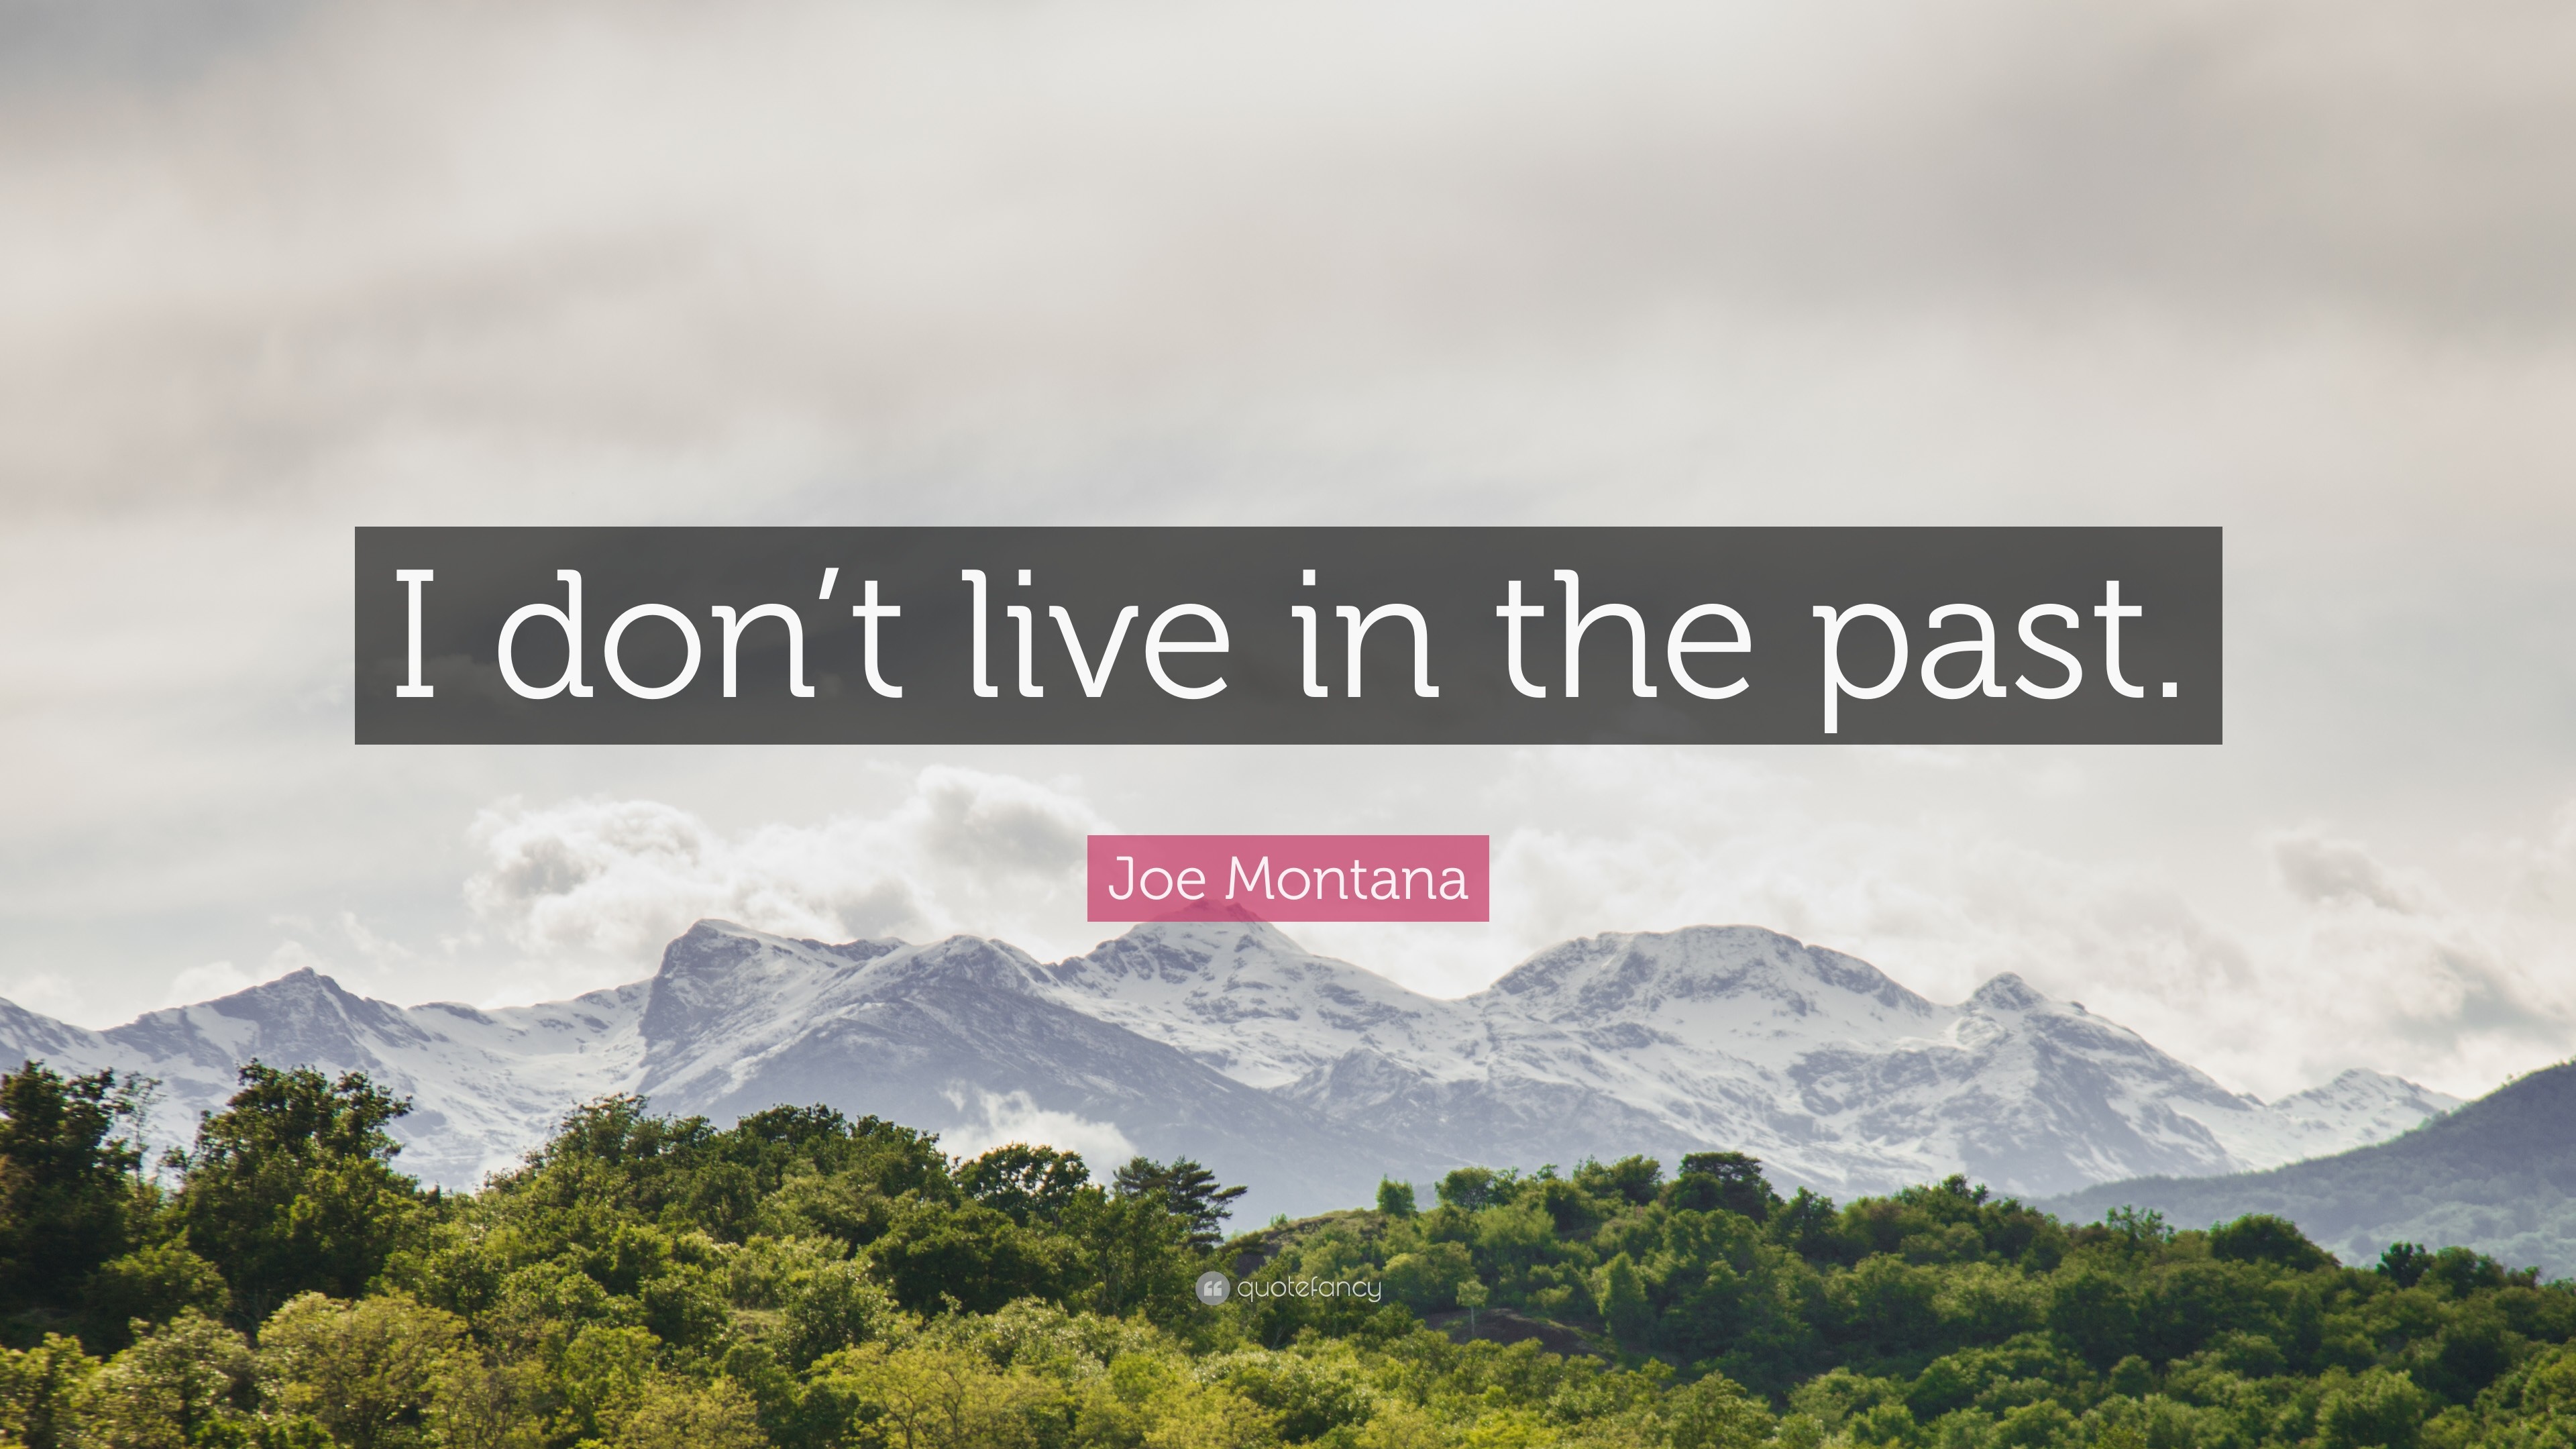 3840x2160 Joe Montana Quote: “I don't live in the past.”